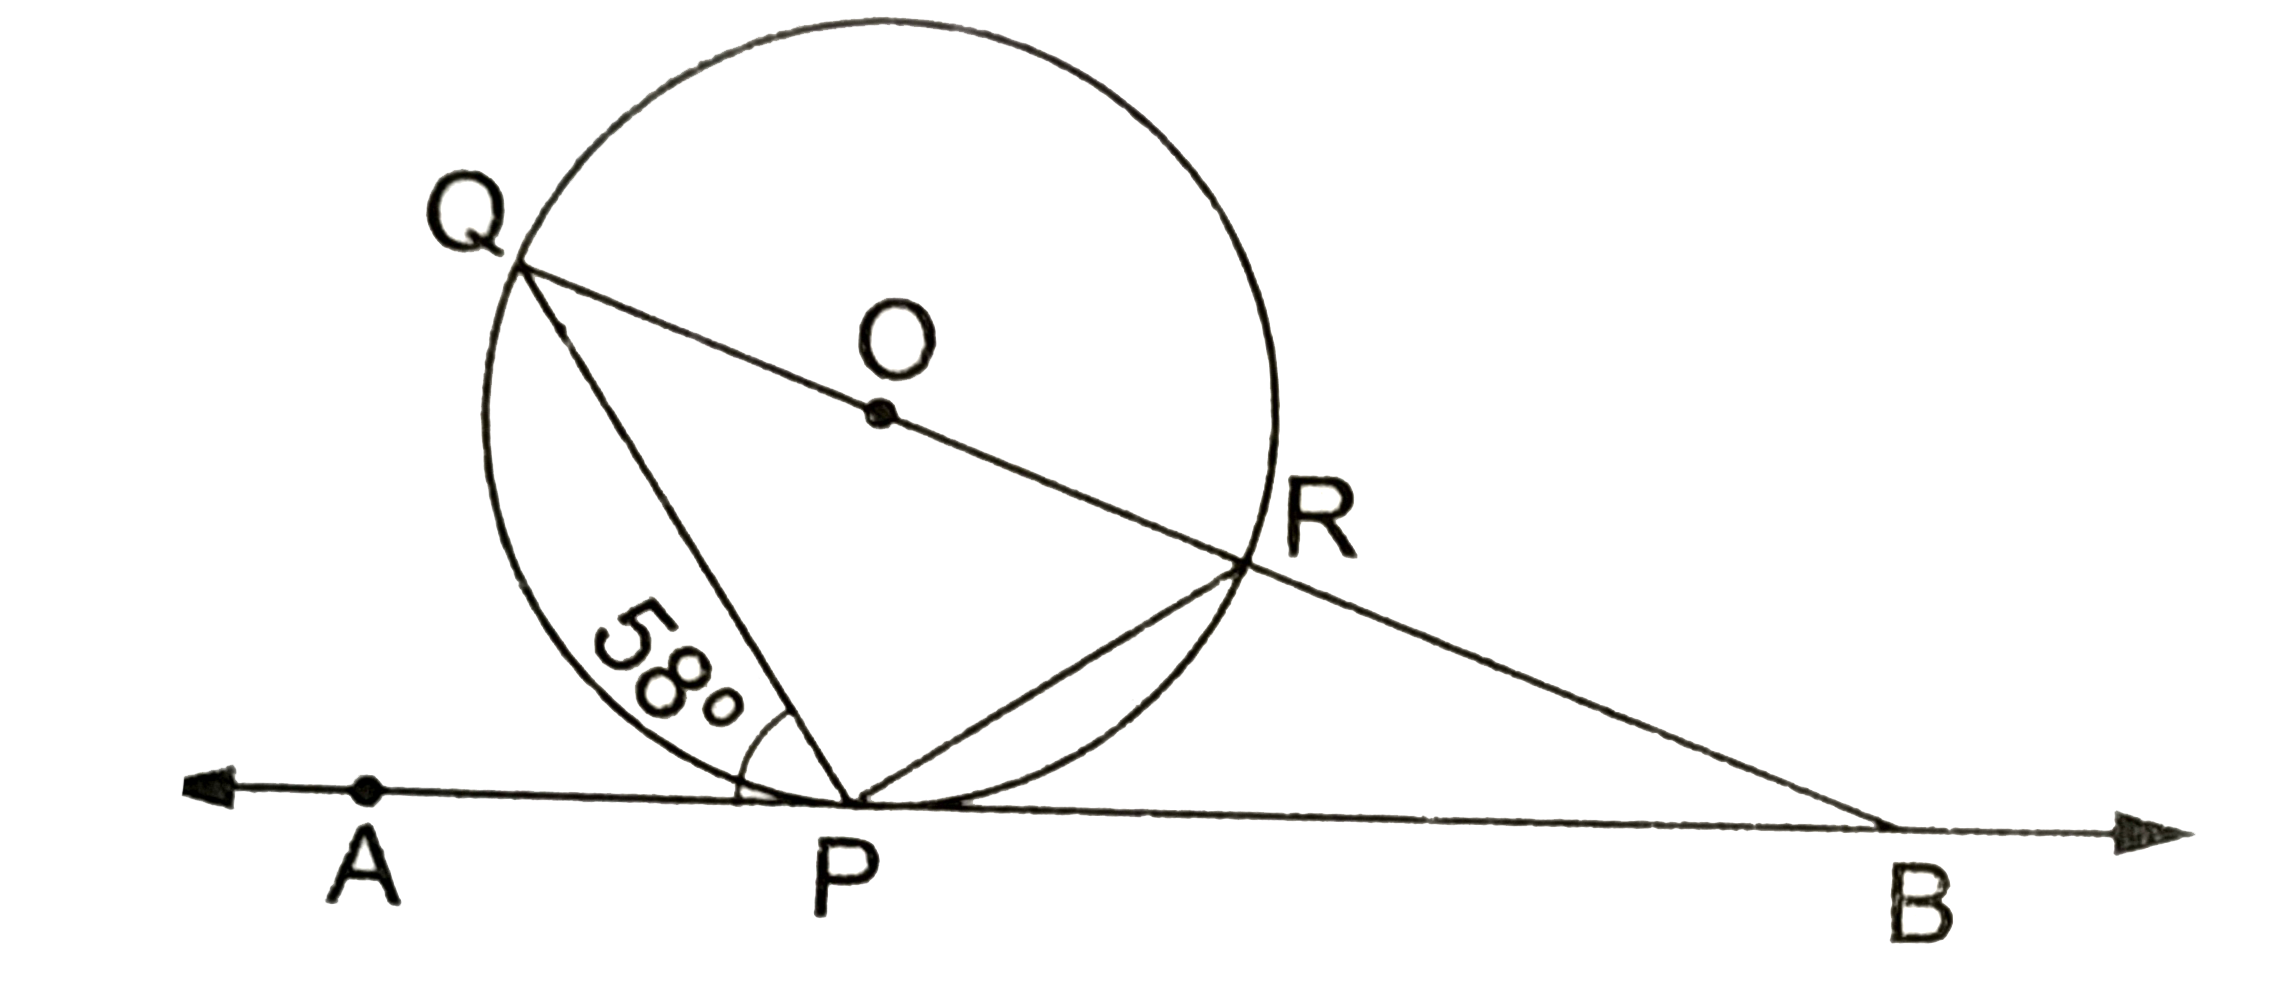 In the given figure, O is the centre of the circle. AB is the tangent to the circle at the point P. If /APQ=58^(@) then the measure of /PQB is